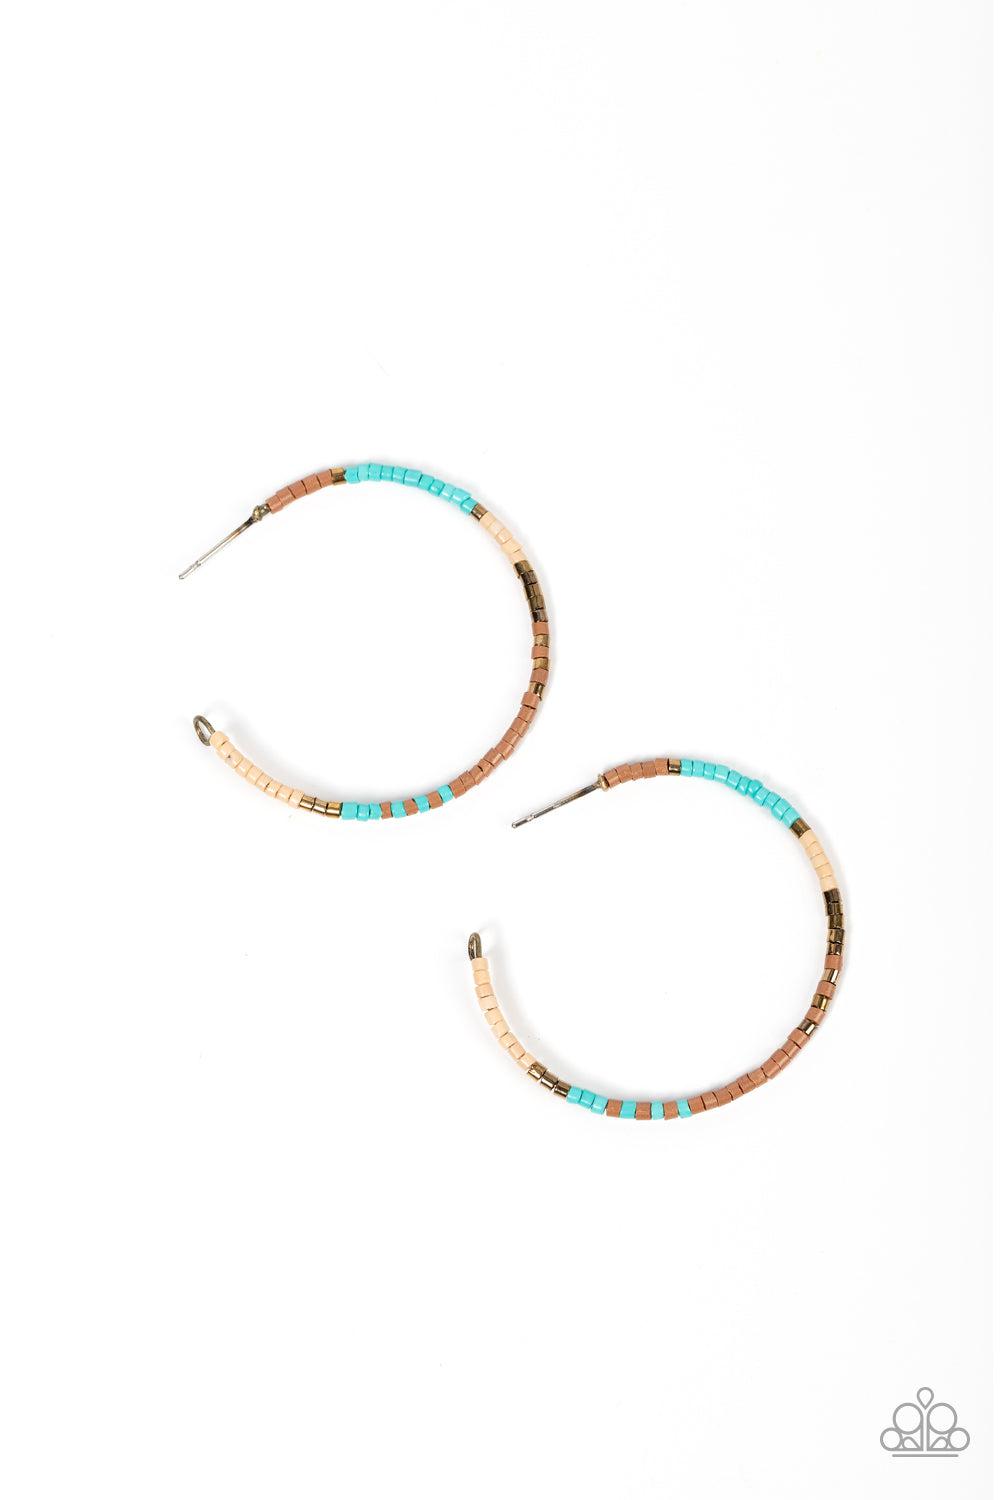 Joshua Tree Tourist Brass, Turquoise &amp; Brown Hoop Earrings - Paparazzi Accessories- lightbox - CarasShop.com - $5 Jewelry by Cara Jewels